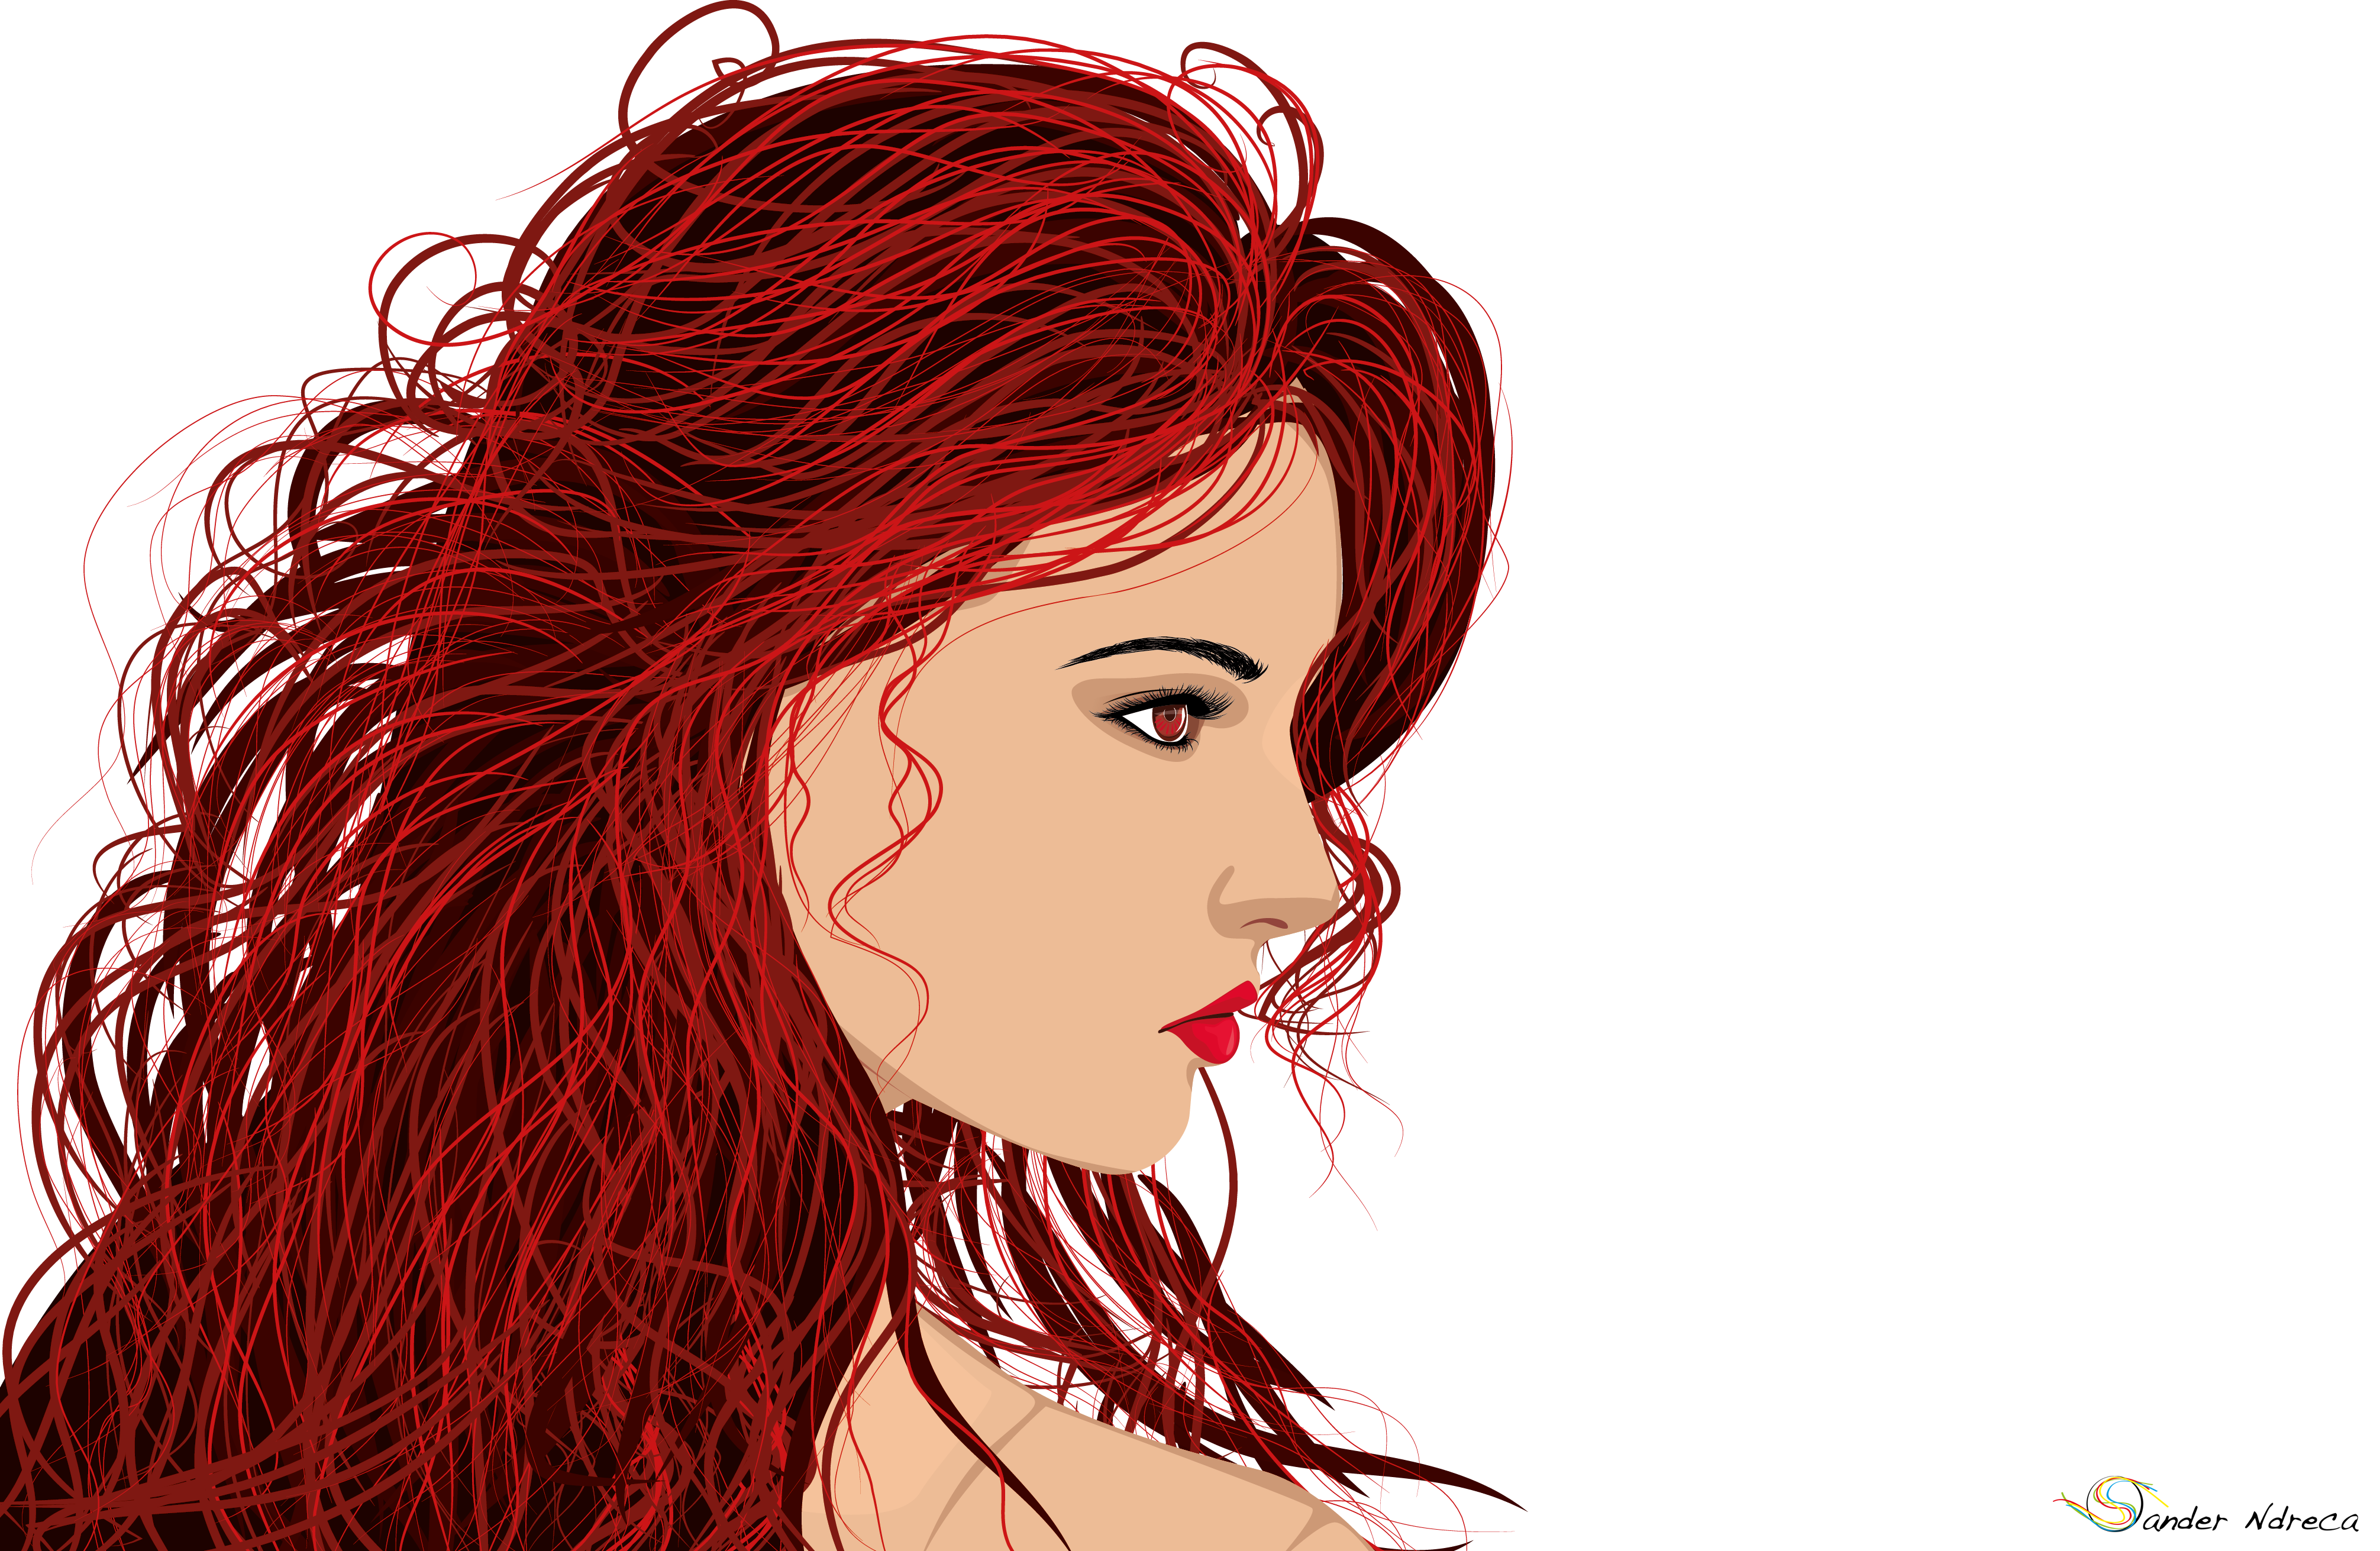 The Red Hair 1